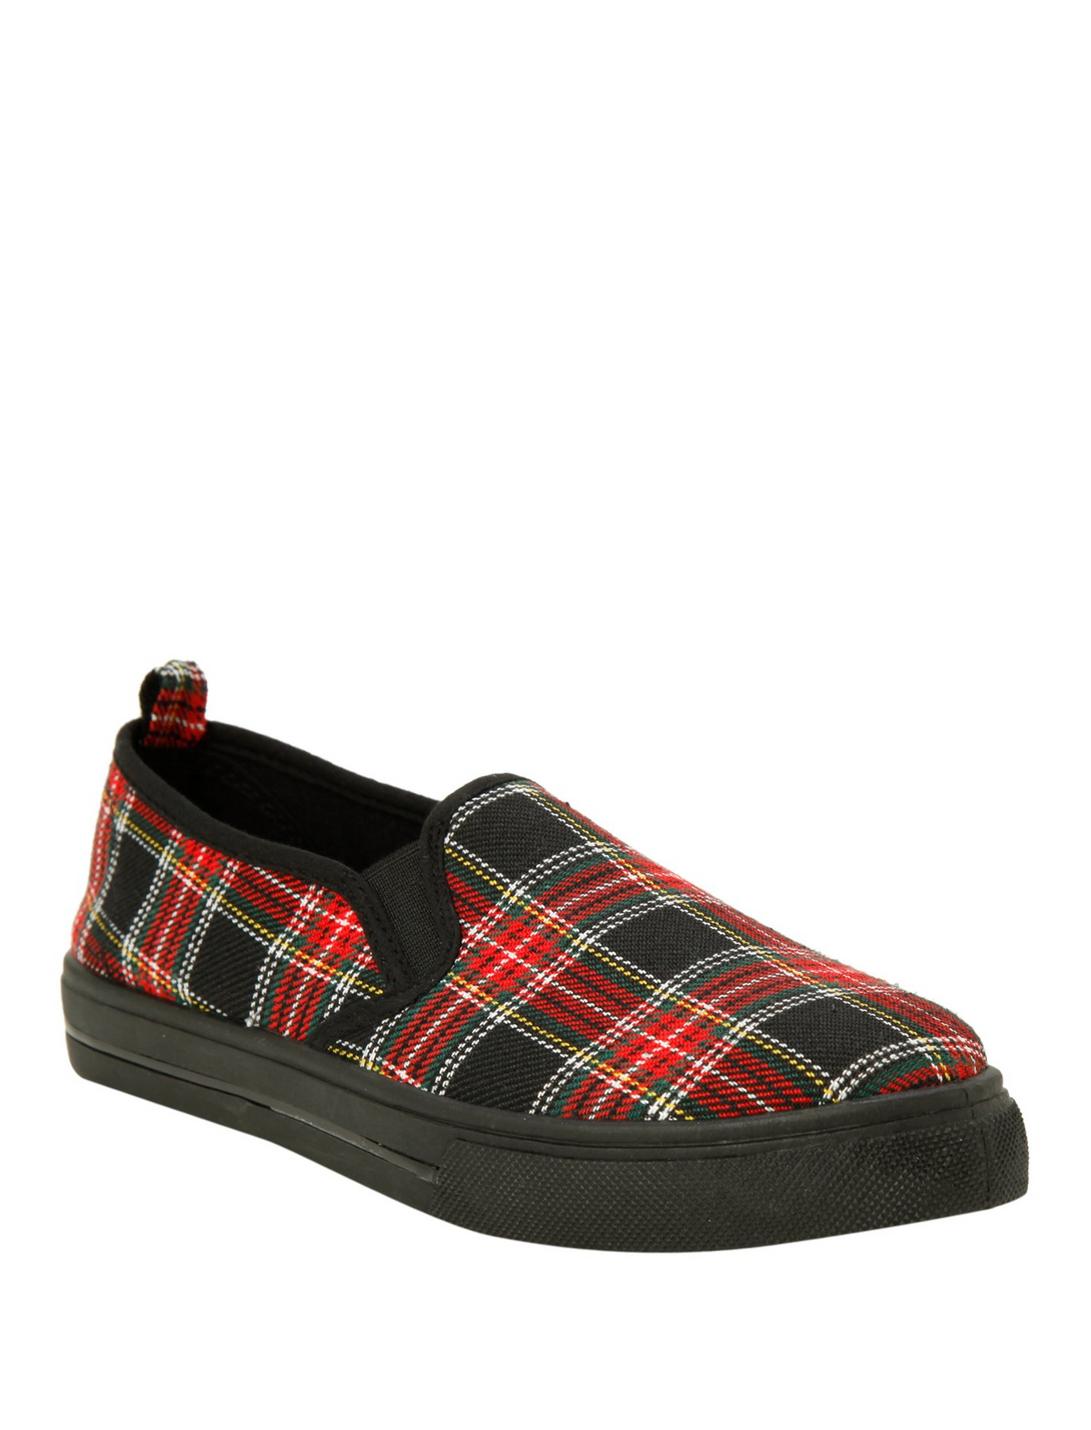 Red Plaid Slip-On Shoes, RED, hi-res